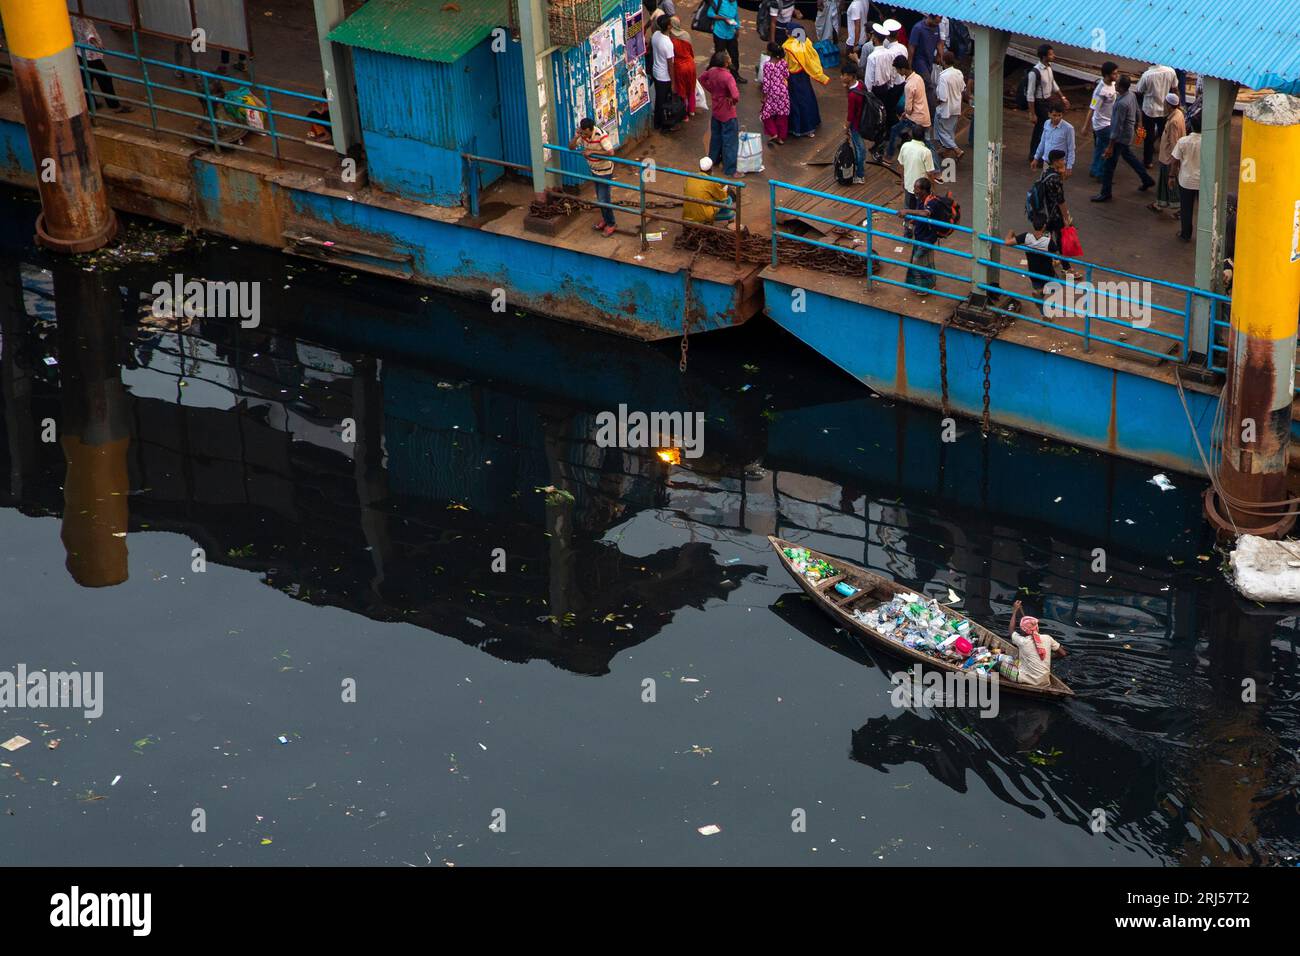 A man collects plastic garbage on his small boat form the Buriganga River near Sadarghat in Old Dhaka, Bangladesh. Stock Photo